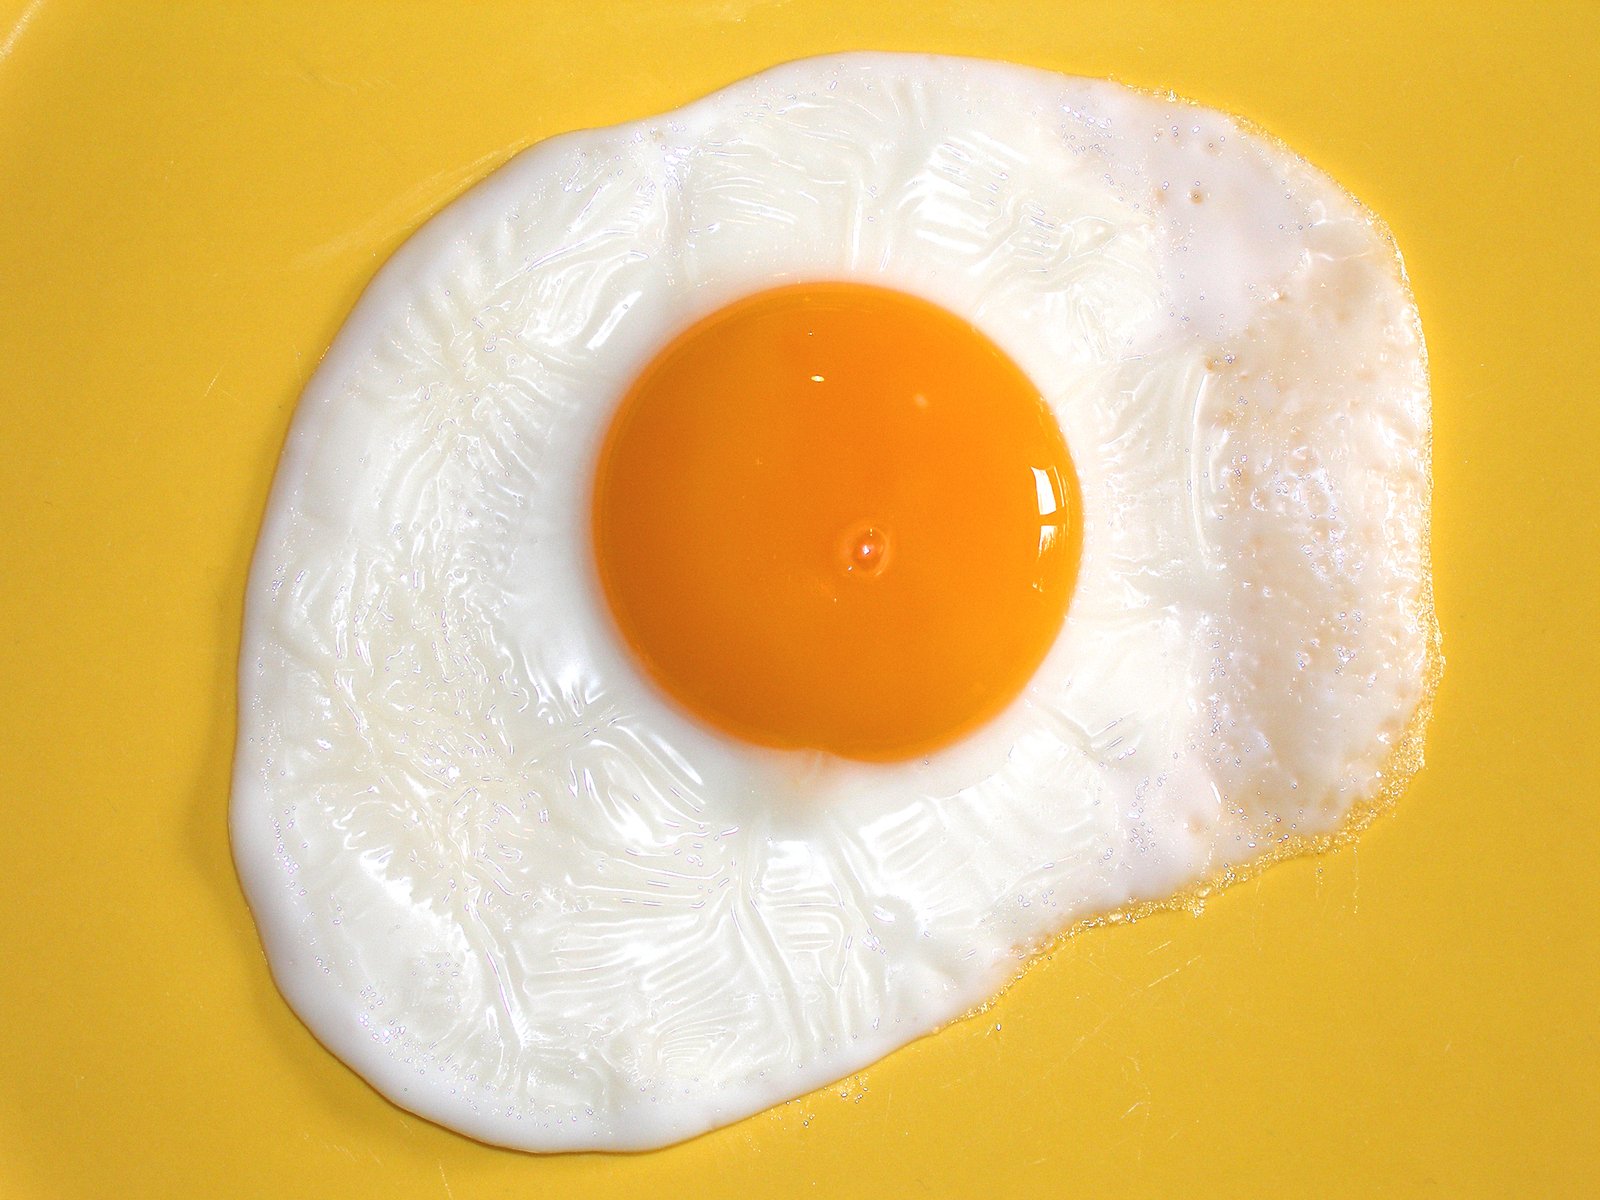 a fried egg on top of an orange and yellow plate